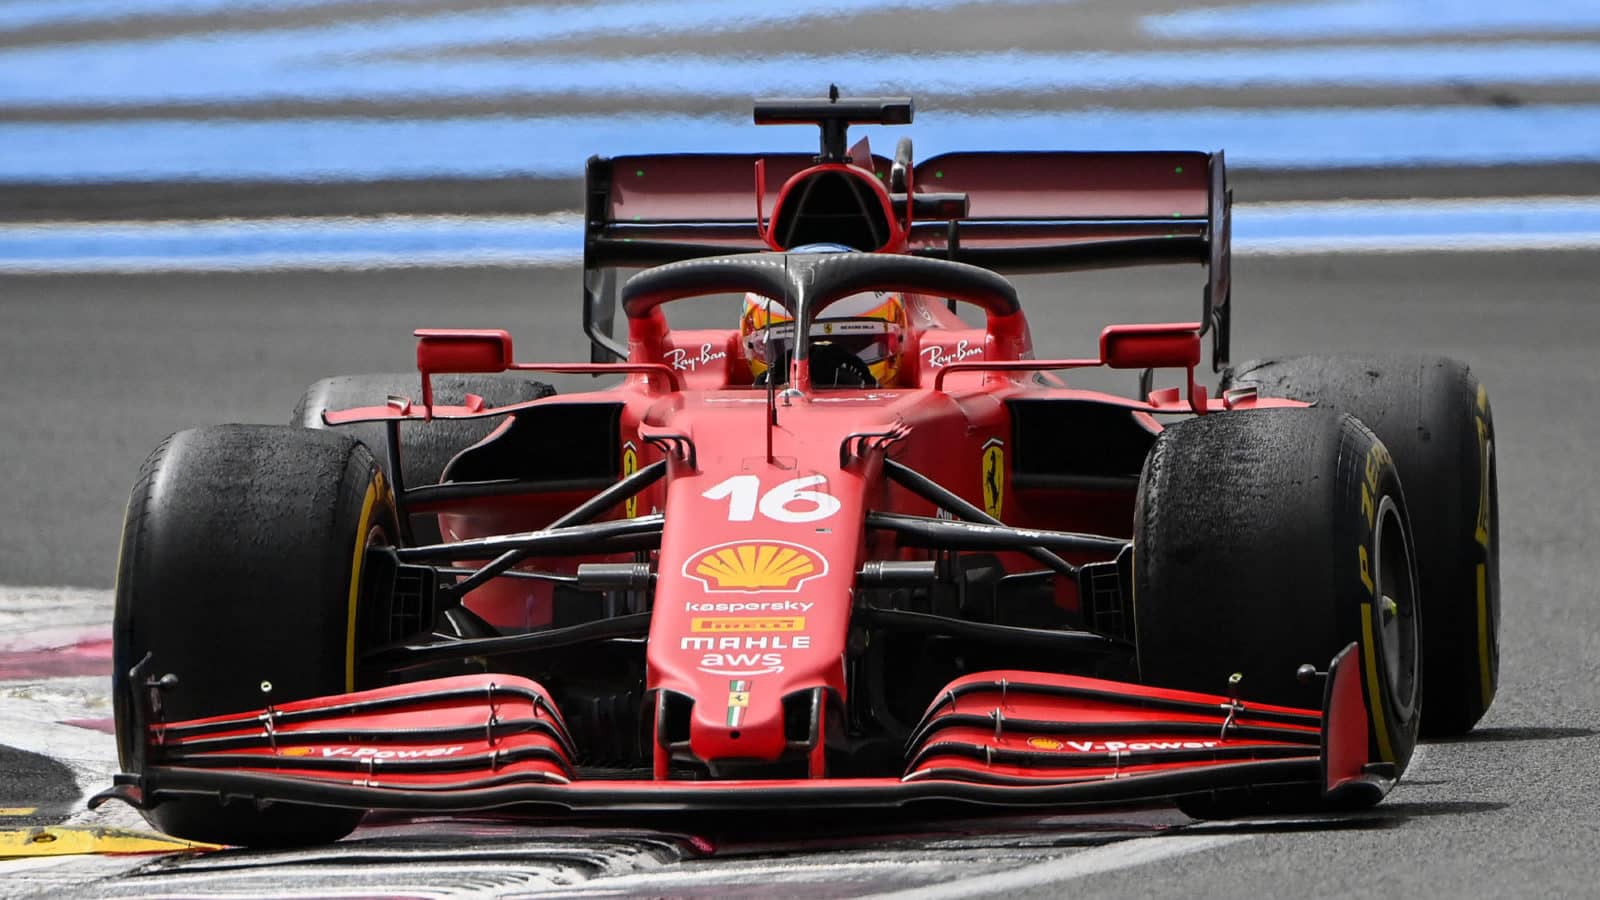 Ferrari's Monegasque driver Charles Leclerc drives during the French Formula One Grand Prix at the Circuit Paul-Ricard in Le Castellet, southern France, on June 20, 2021. (Photo by CHRISTOPHE SIMON / AFP) (Photo by CHRISTOPHE SIMON/AFP via Getty Images)